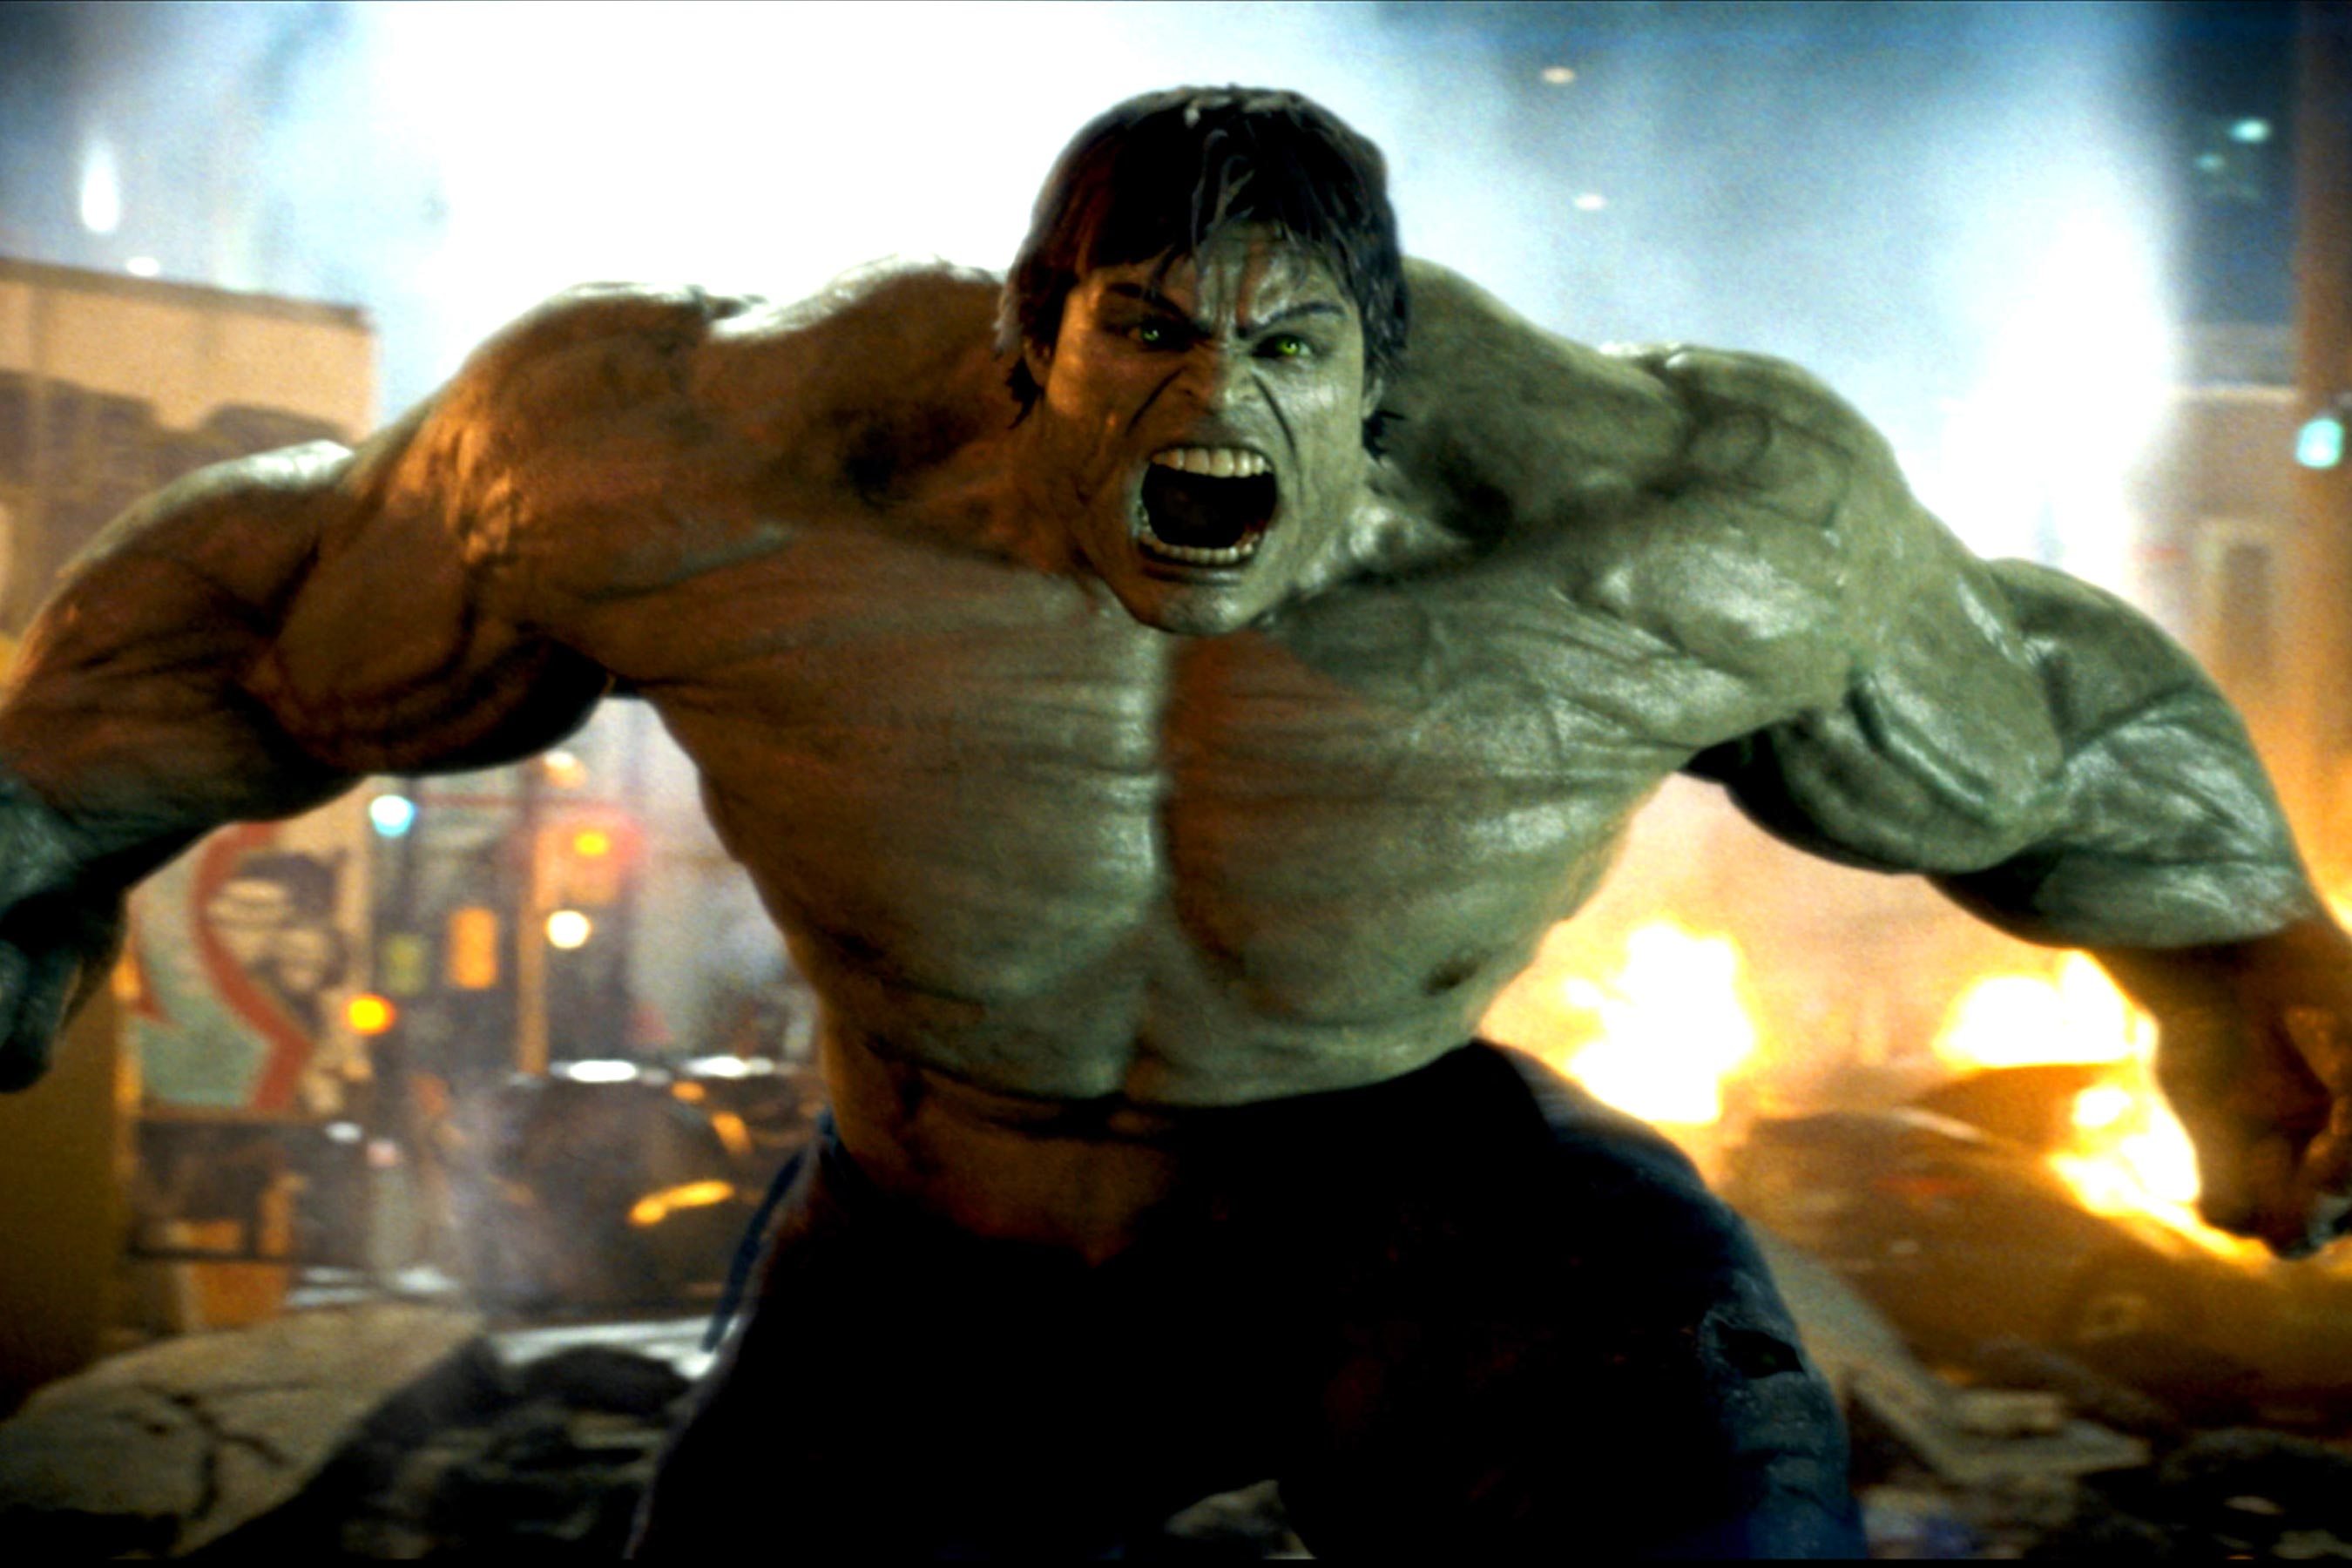 The Incredible Hulk arrives on Disney+ finally as the rights to the movie revert back to Disney